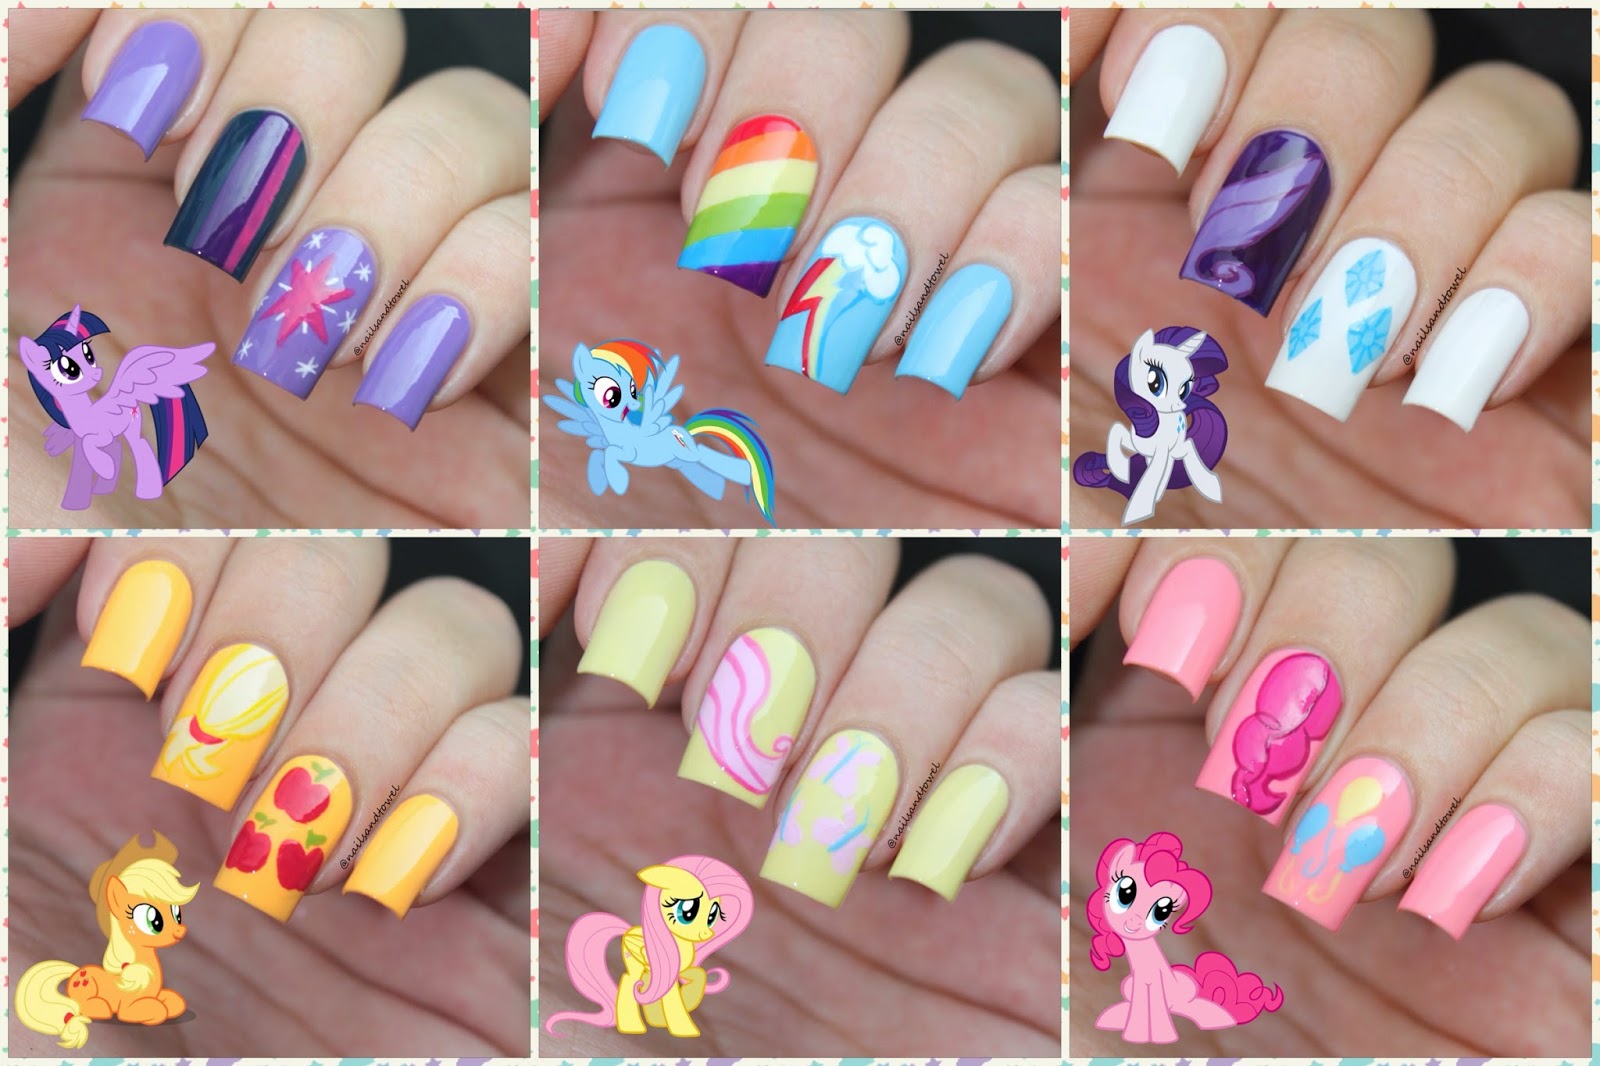 My Little Pony Nail Art Designs - wide 3